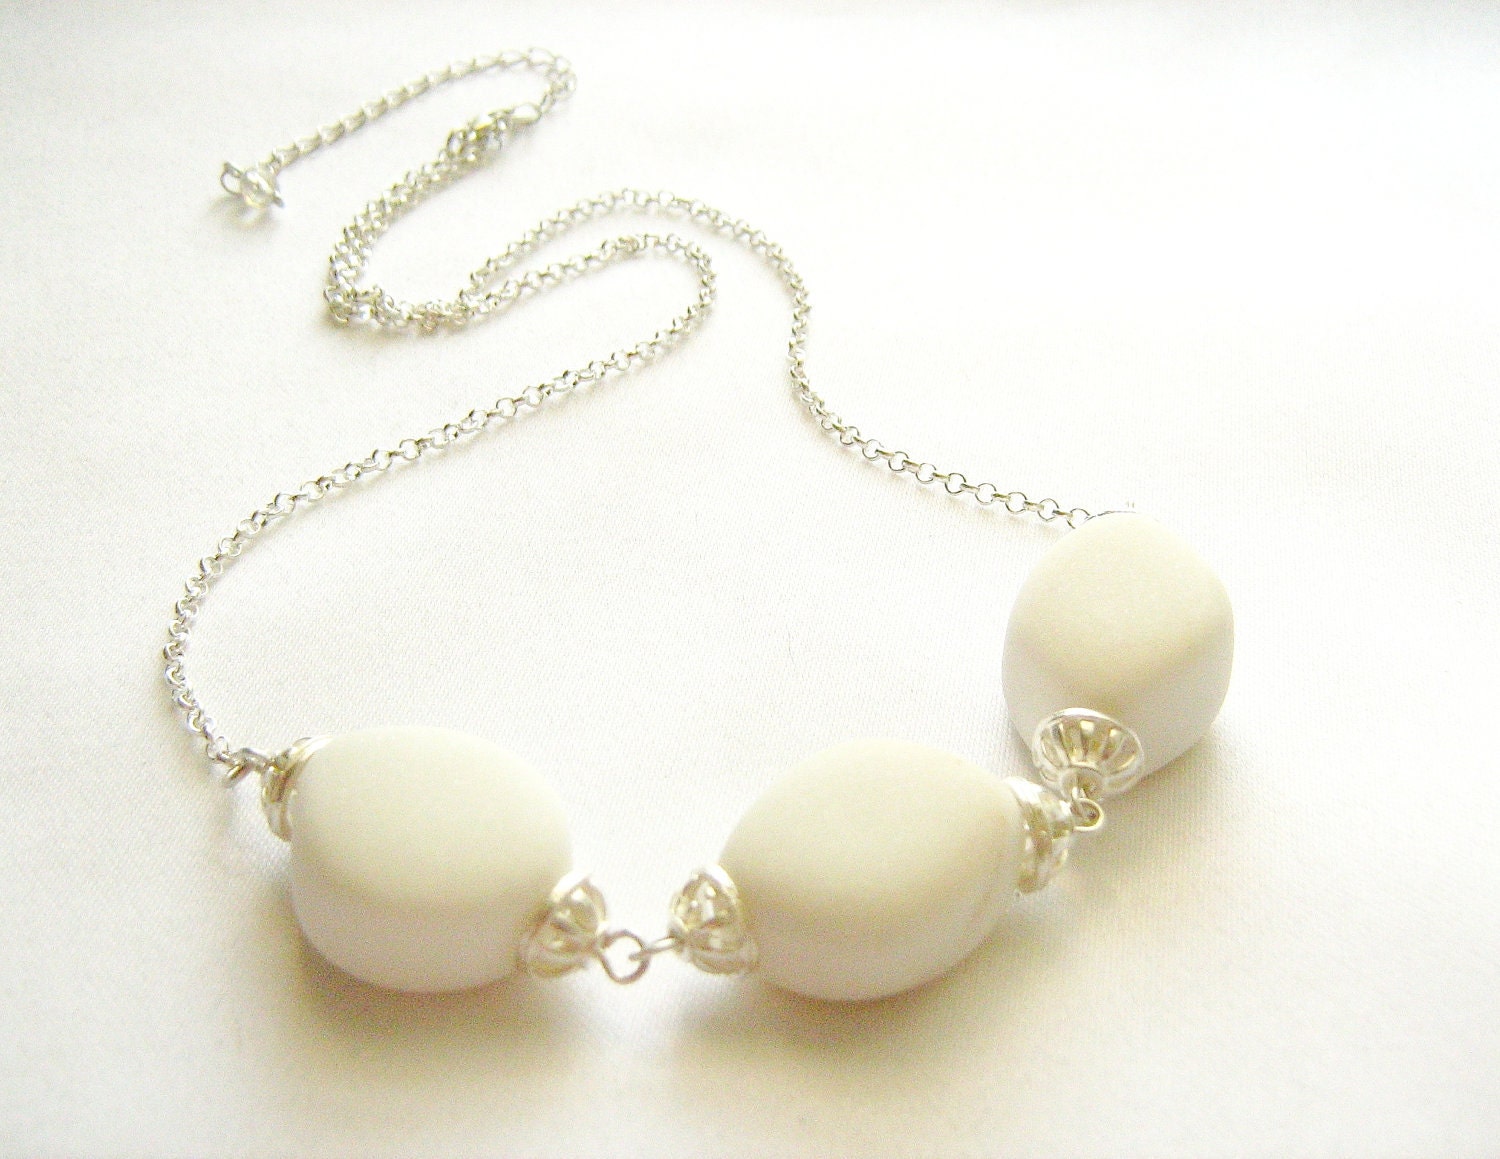 Cotton Candy necklace - white jade stones, silver plate